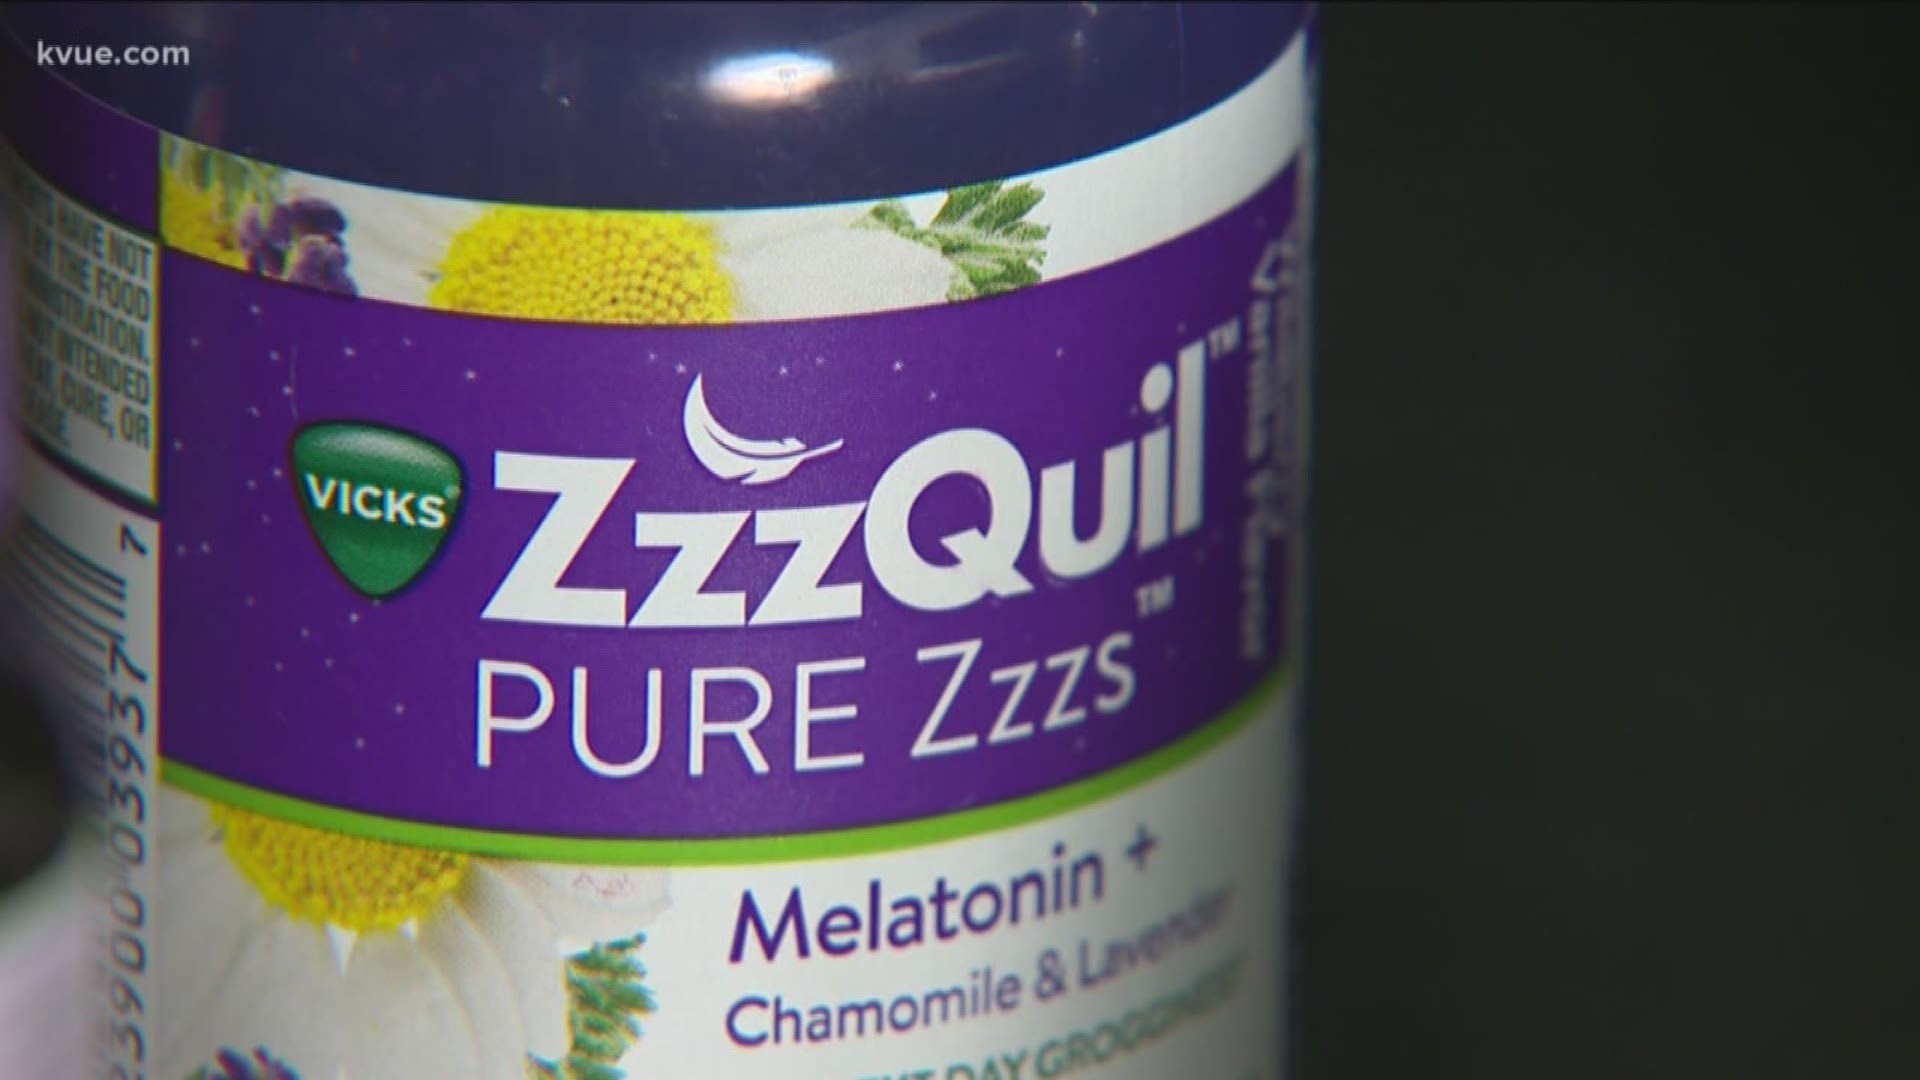 There are supplements available that claim to help you get a good night's sleep.